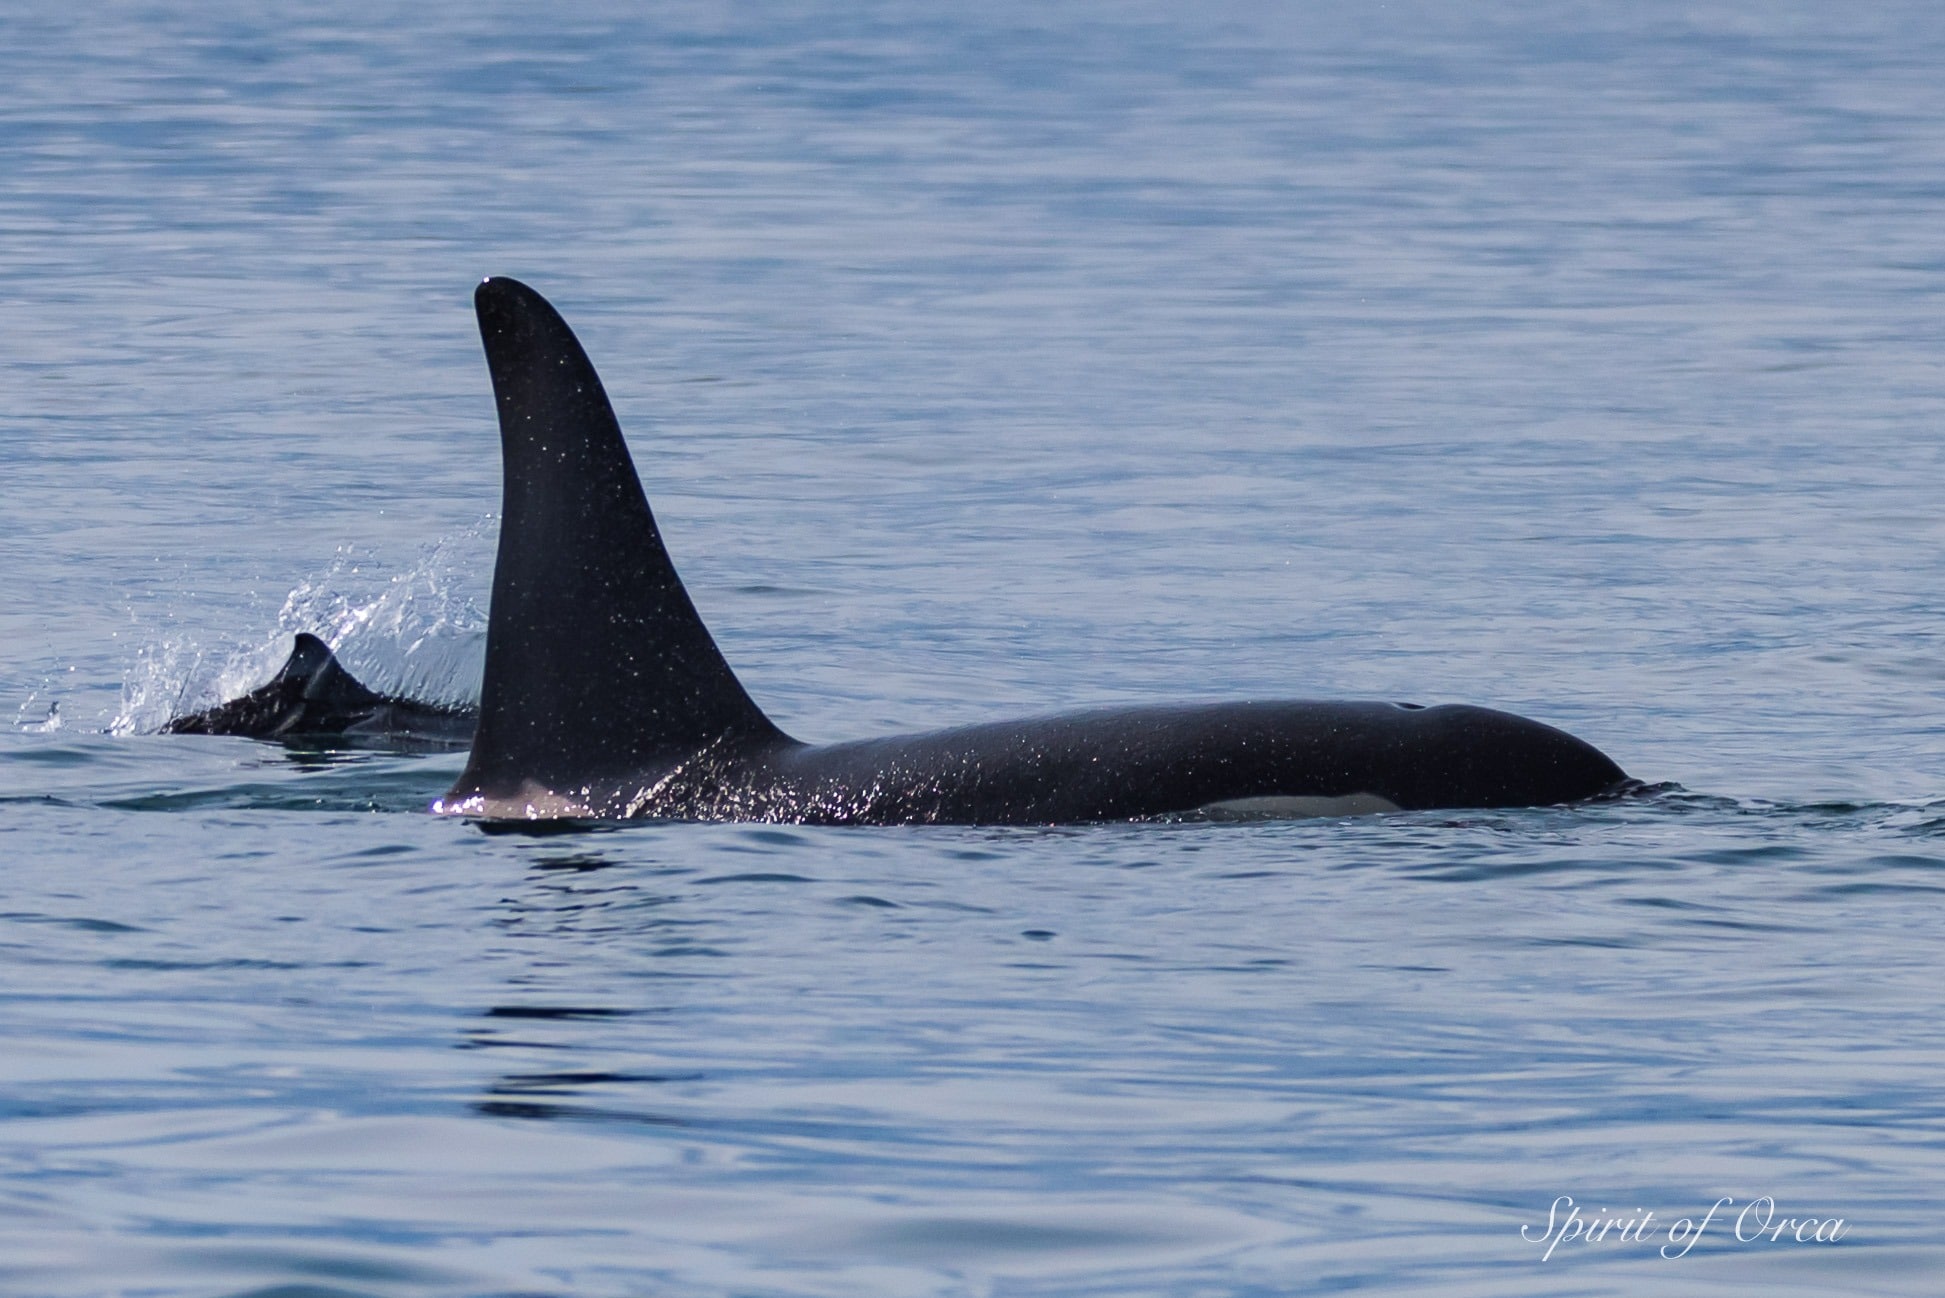 Dall's porpoise play with Killer Whale